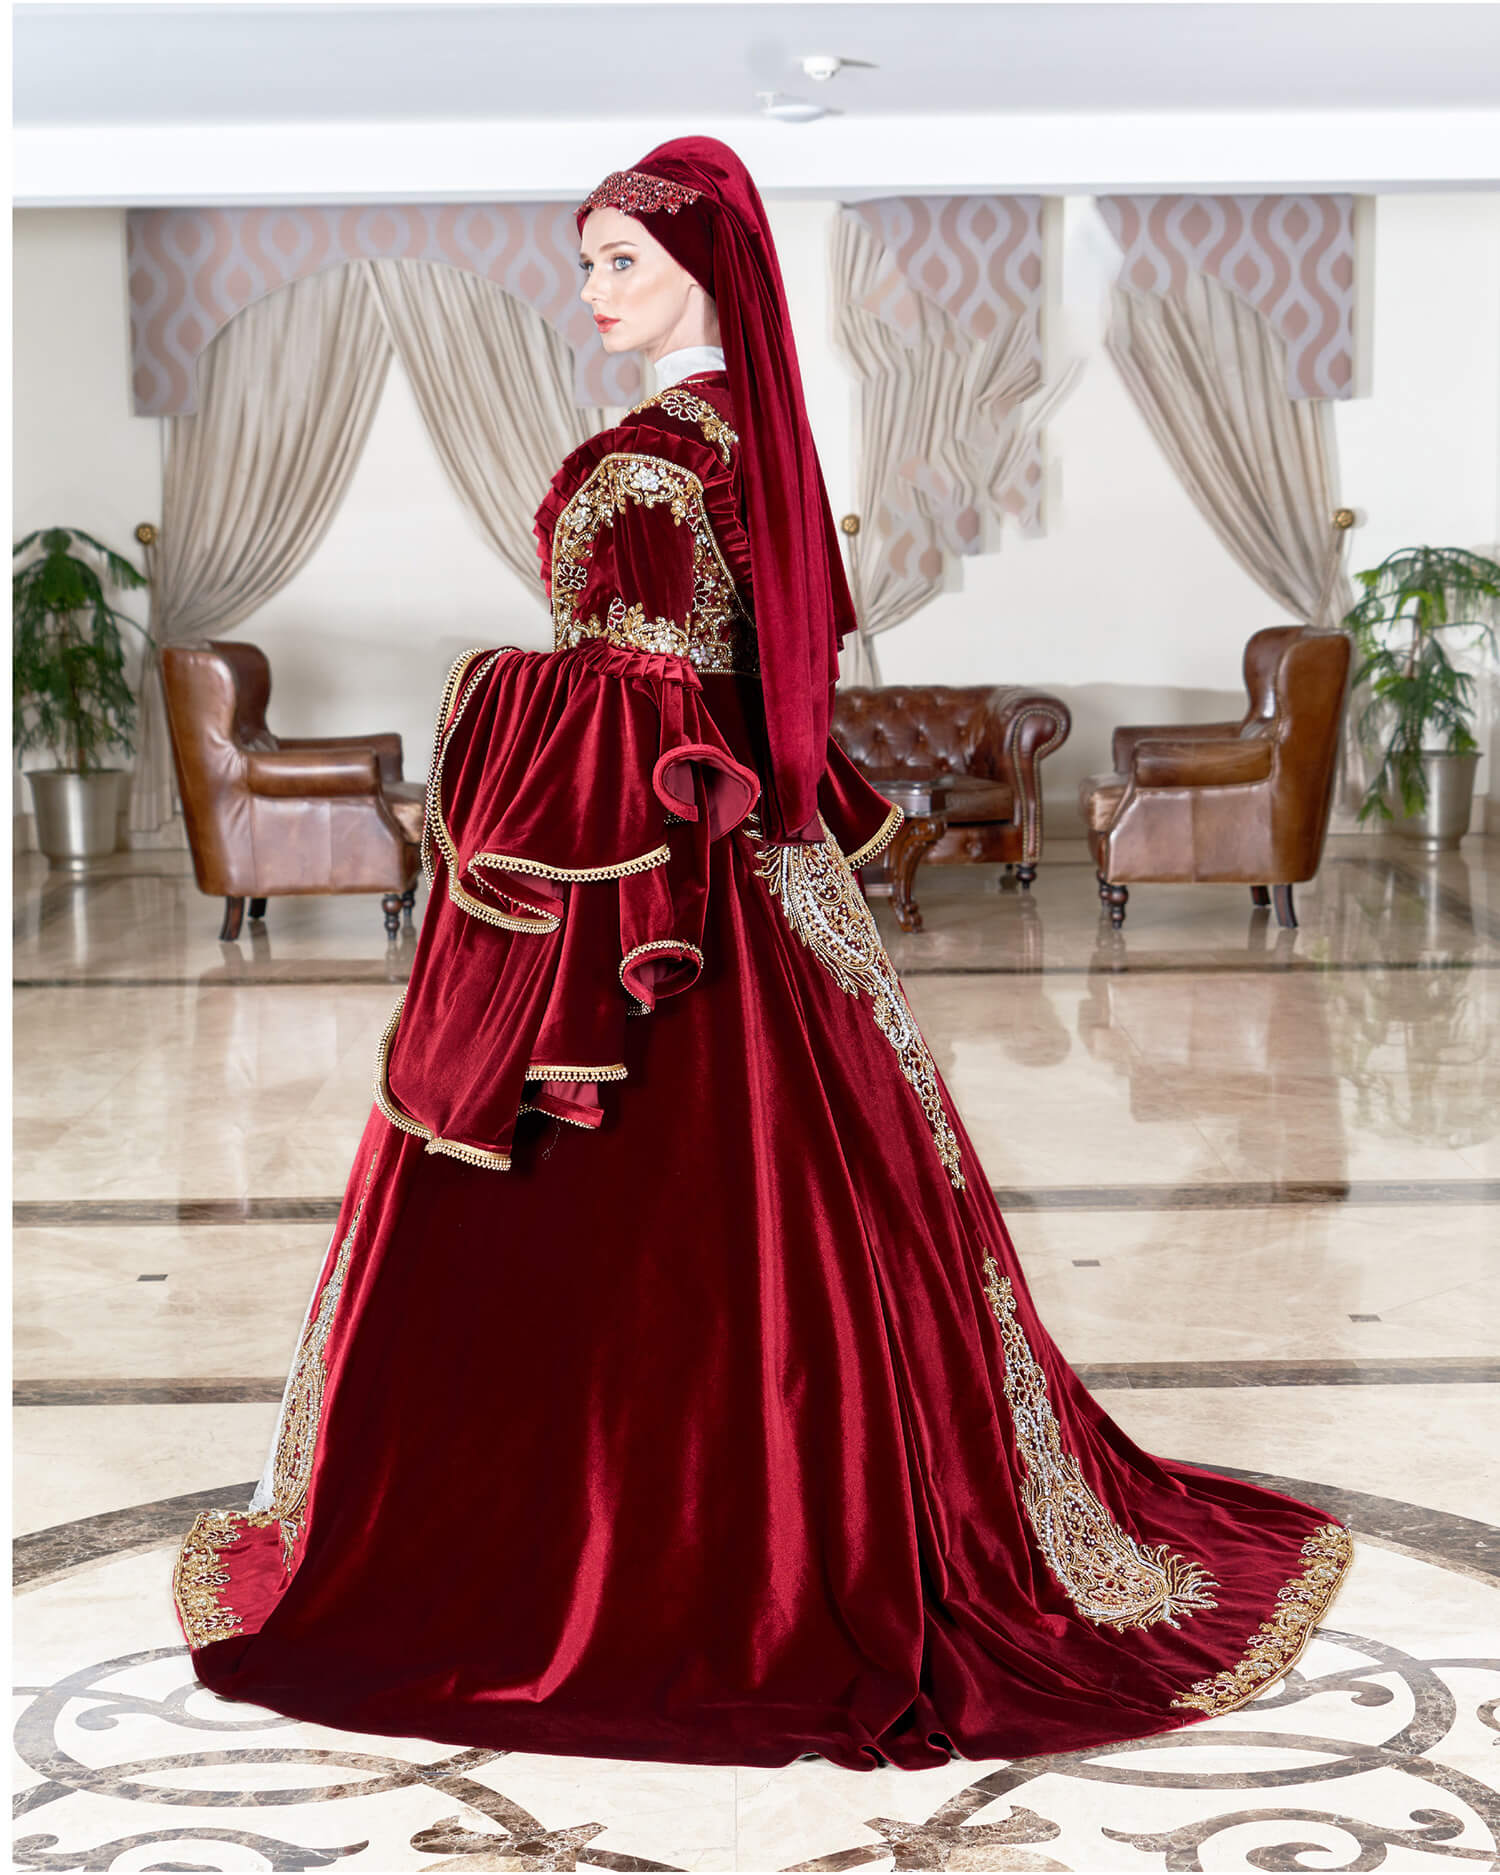 Traditional Style Claret Red Hijab Henna Dress